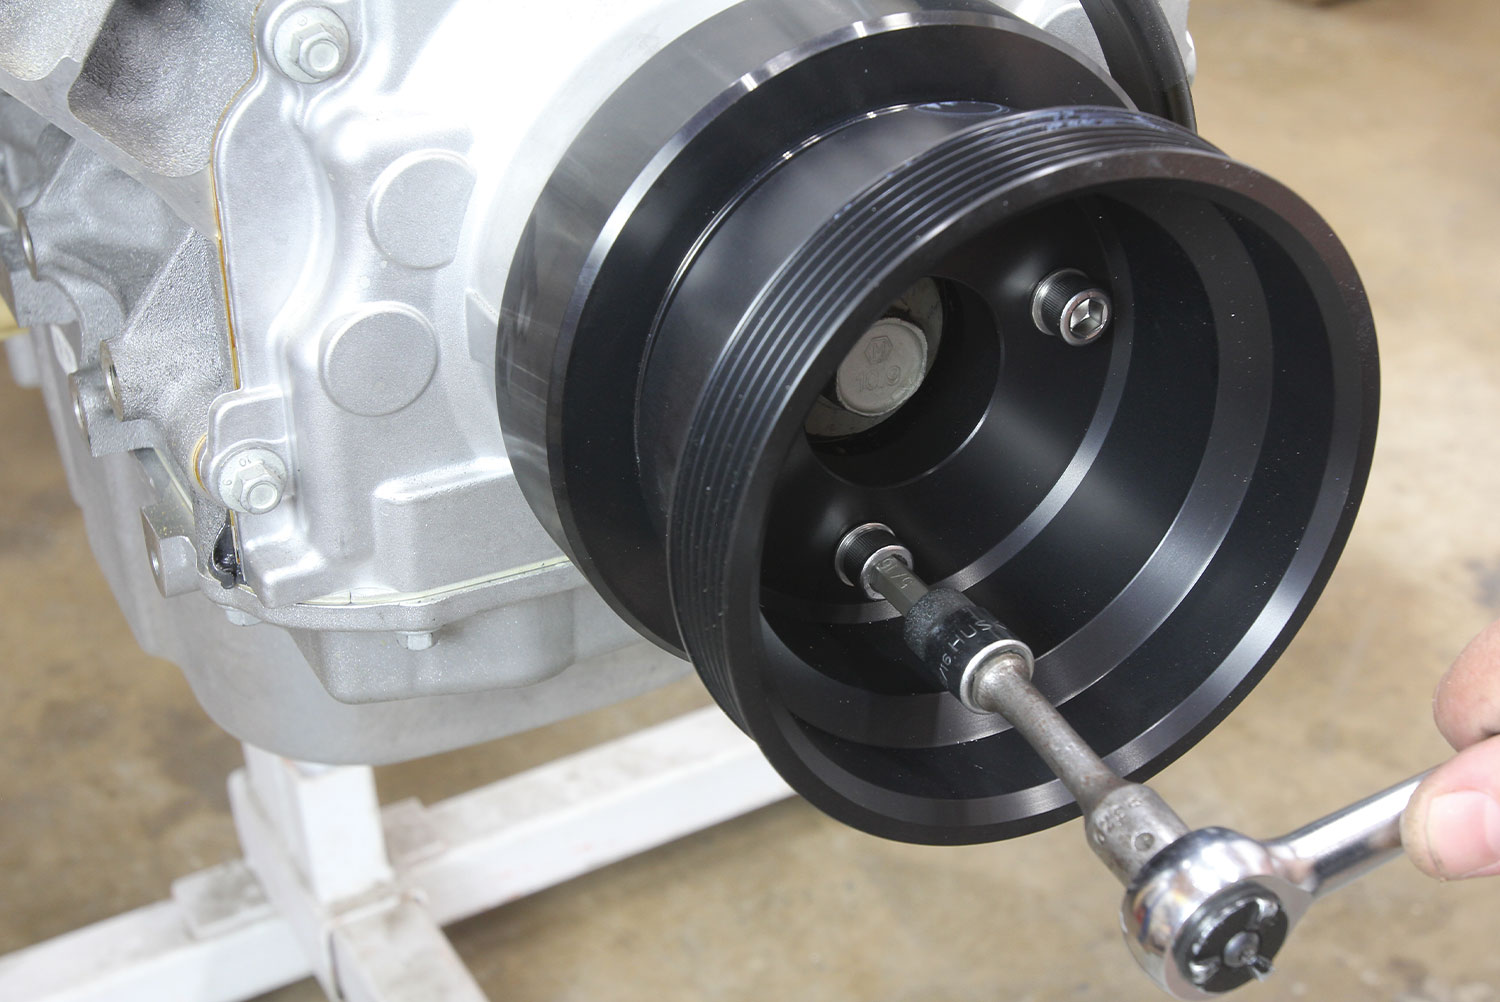 the new Concept One crank pulley is installed using the provided stainless steel socket head cap fasteners